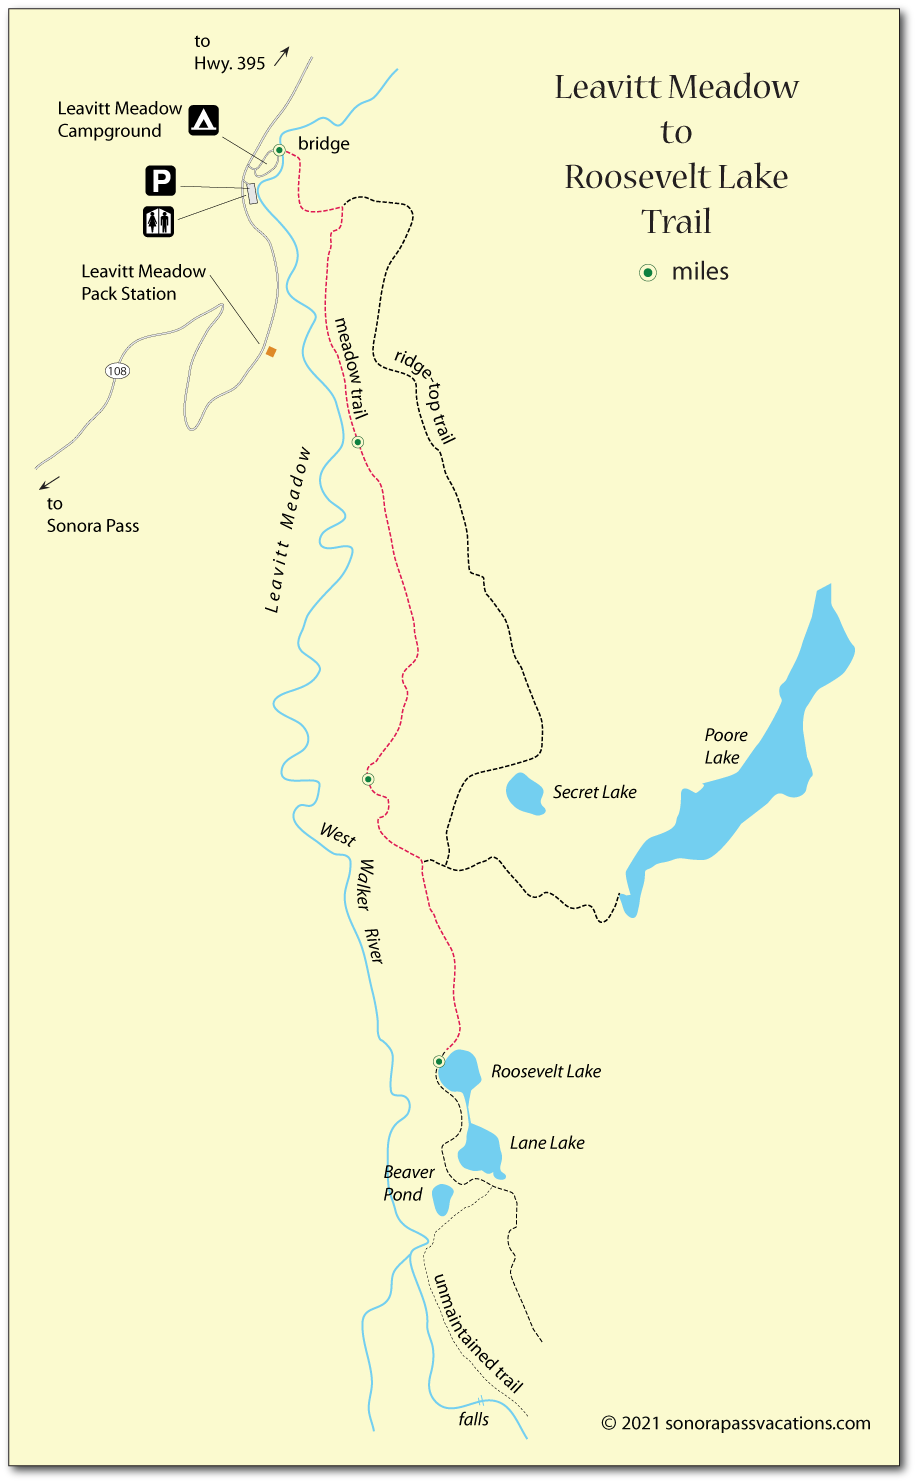 Map of the trail from Leavitt Meadow to Roosevelt Lake, Hoover Wilderness, California